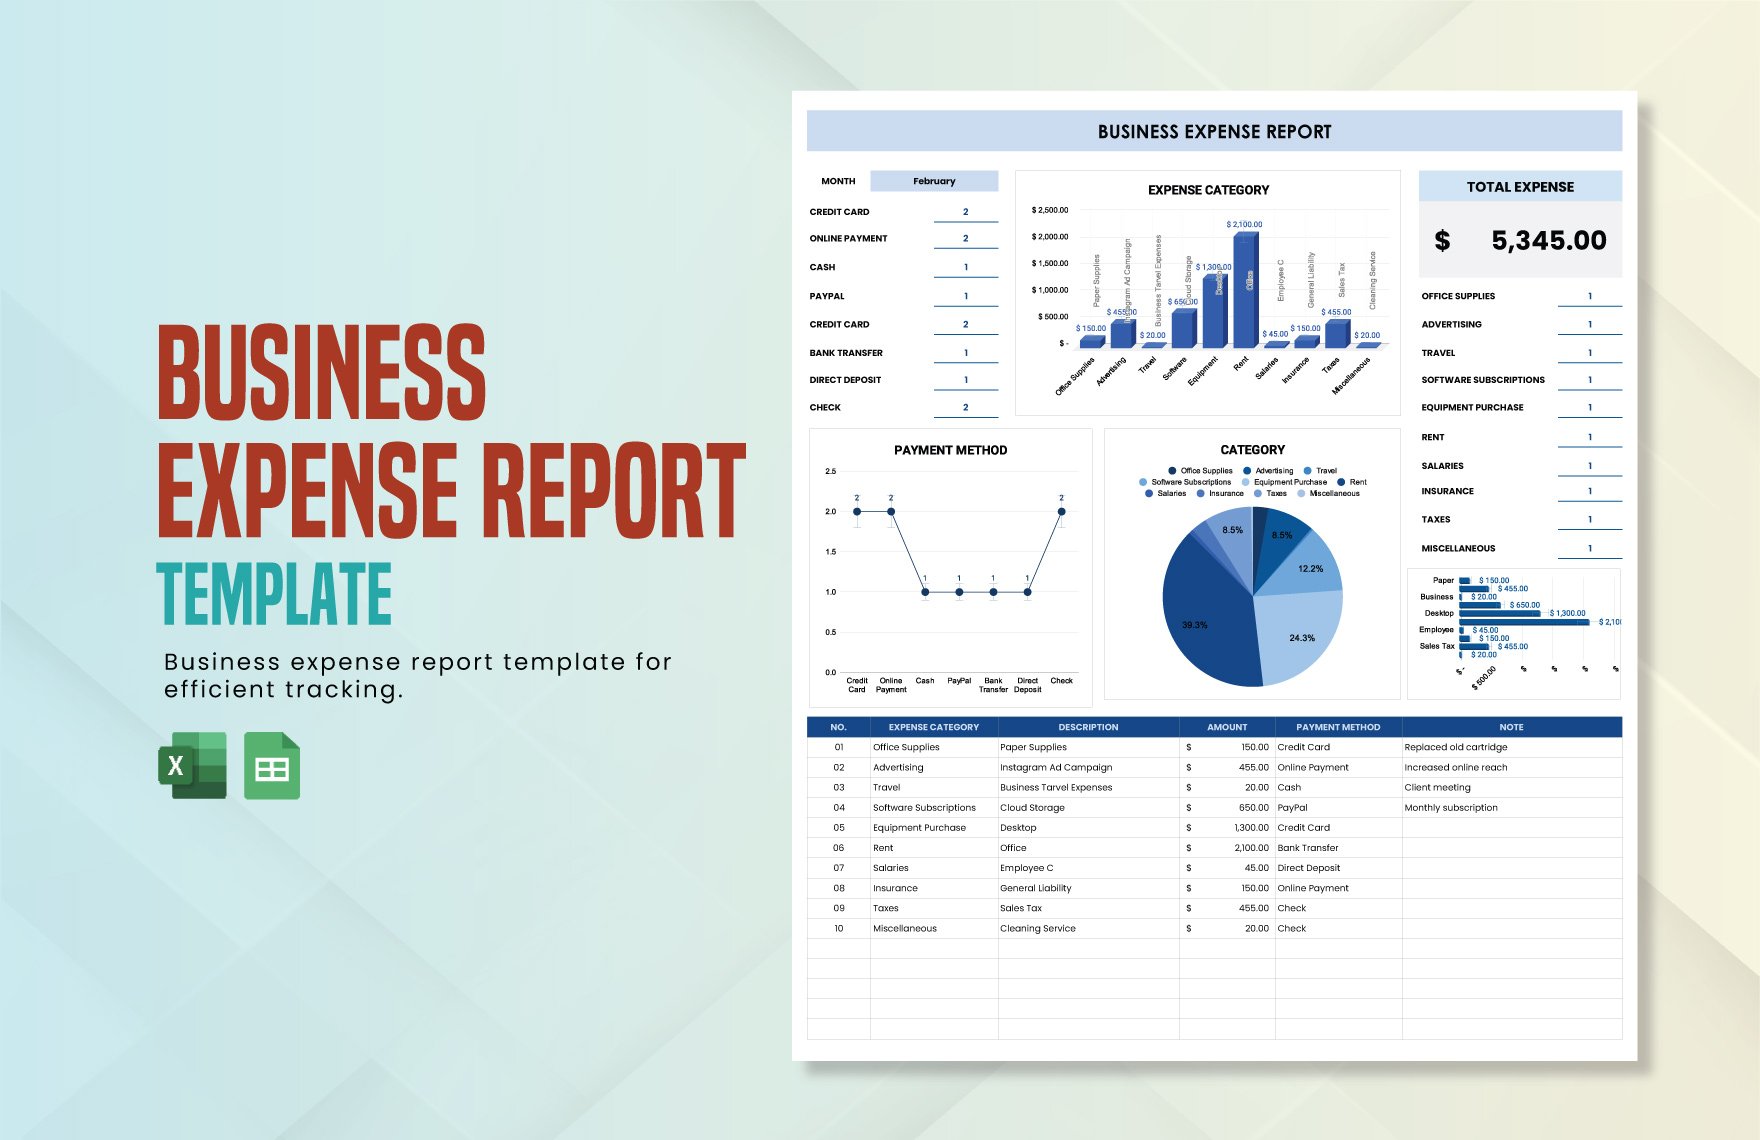 Business Expense Report Template in Excel, Google Sheets